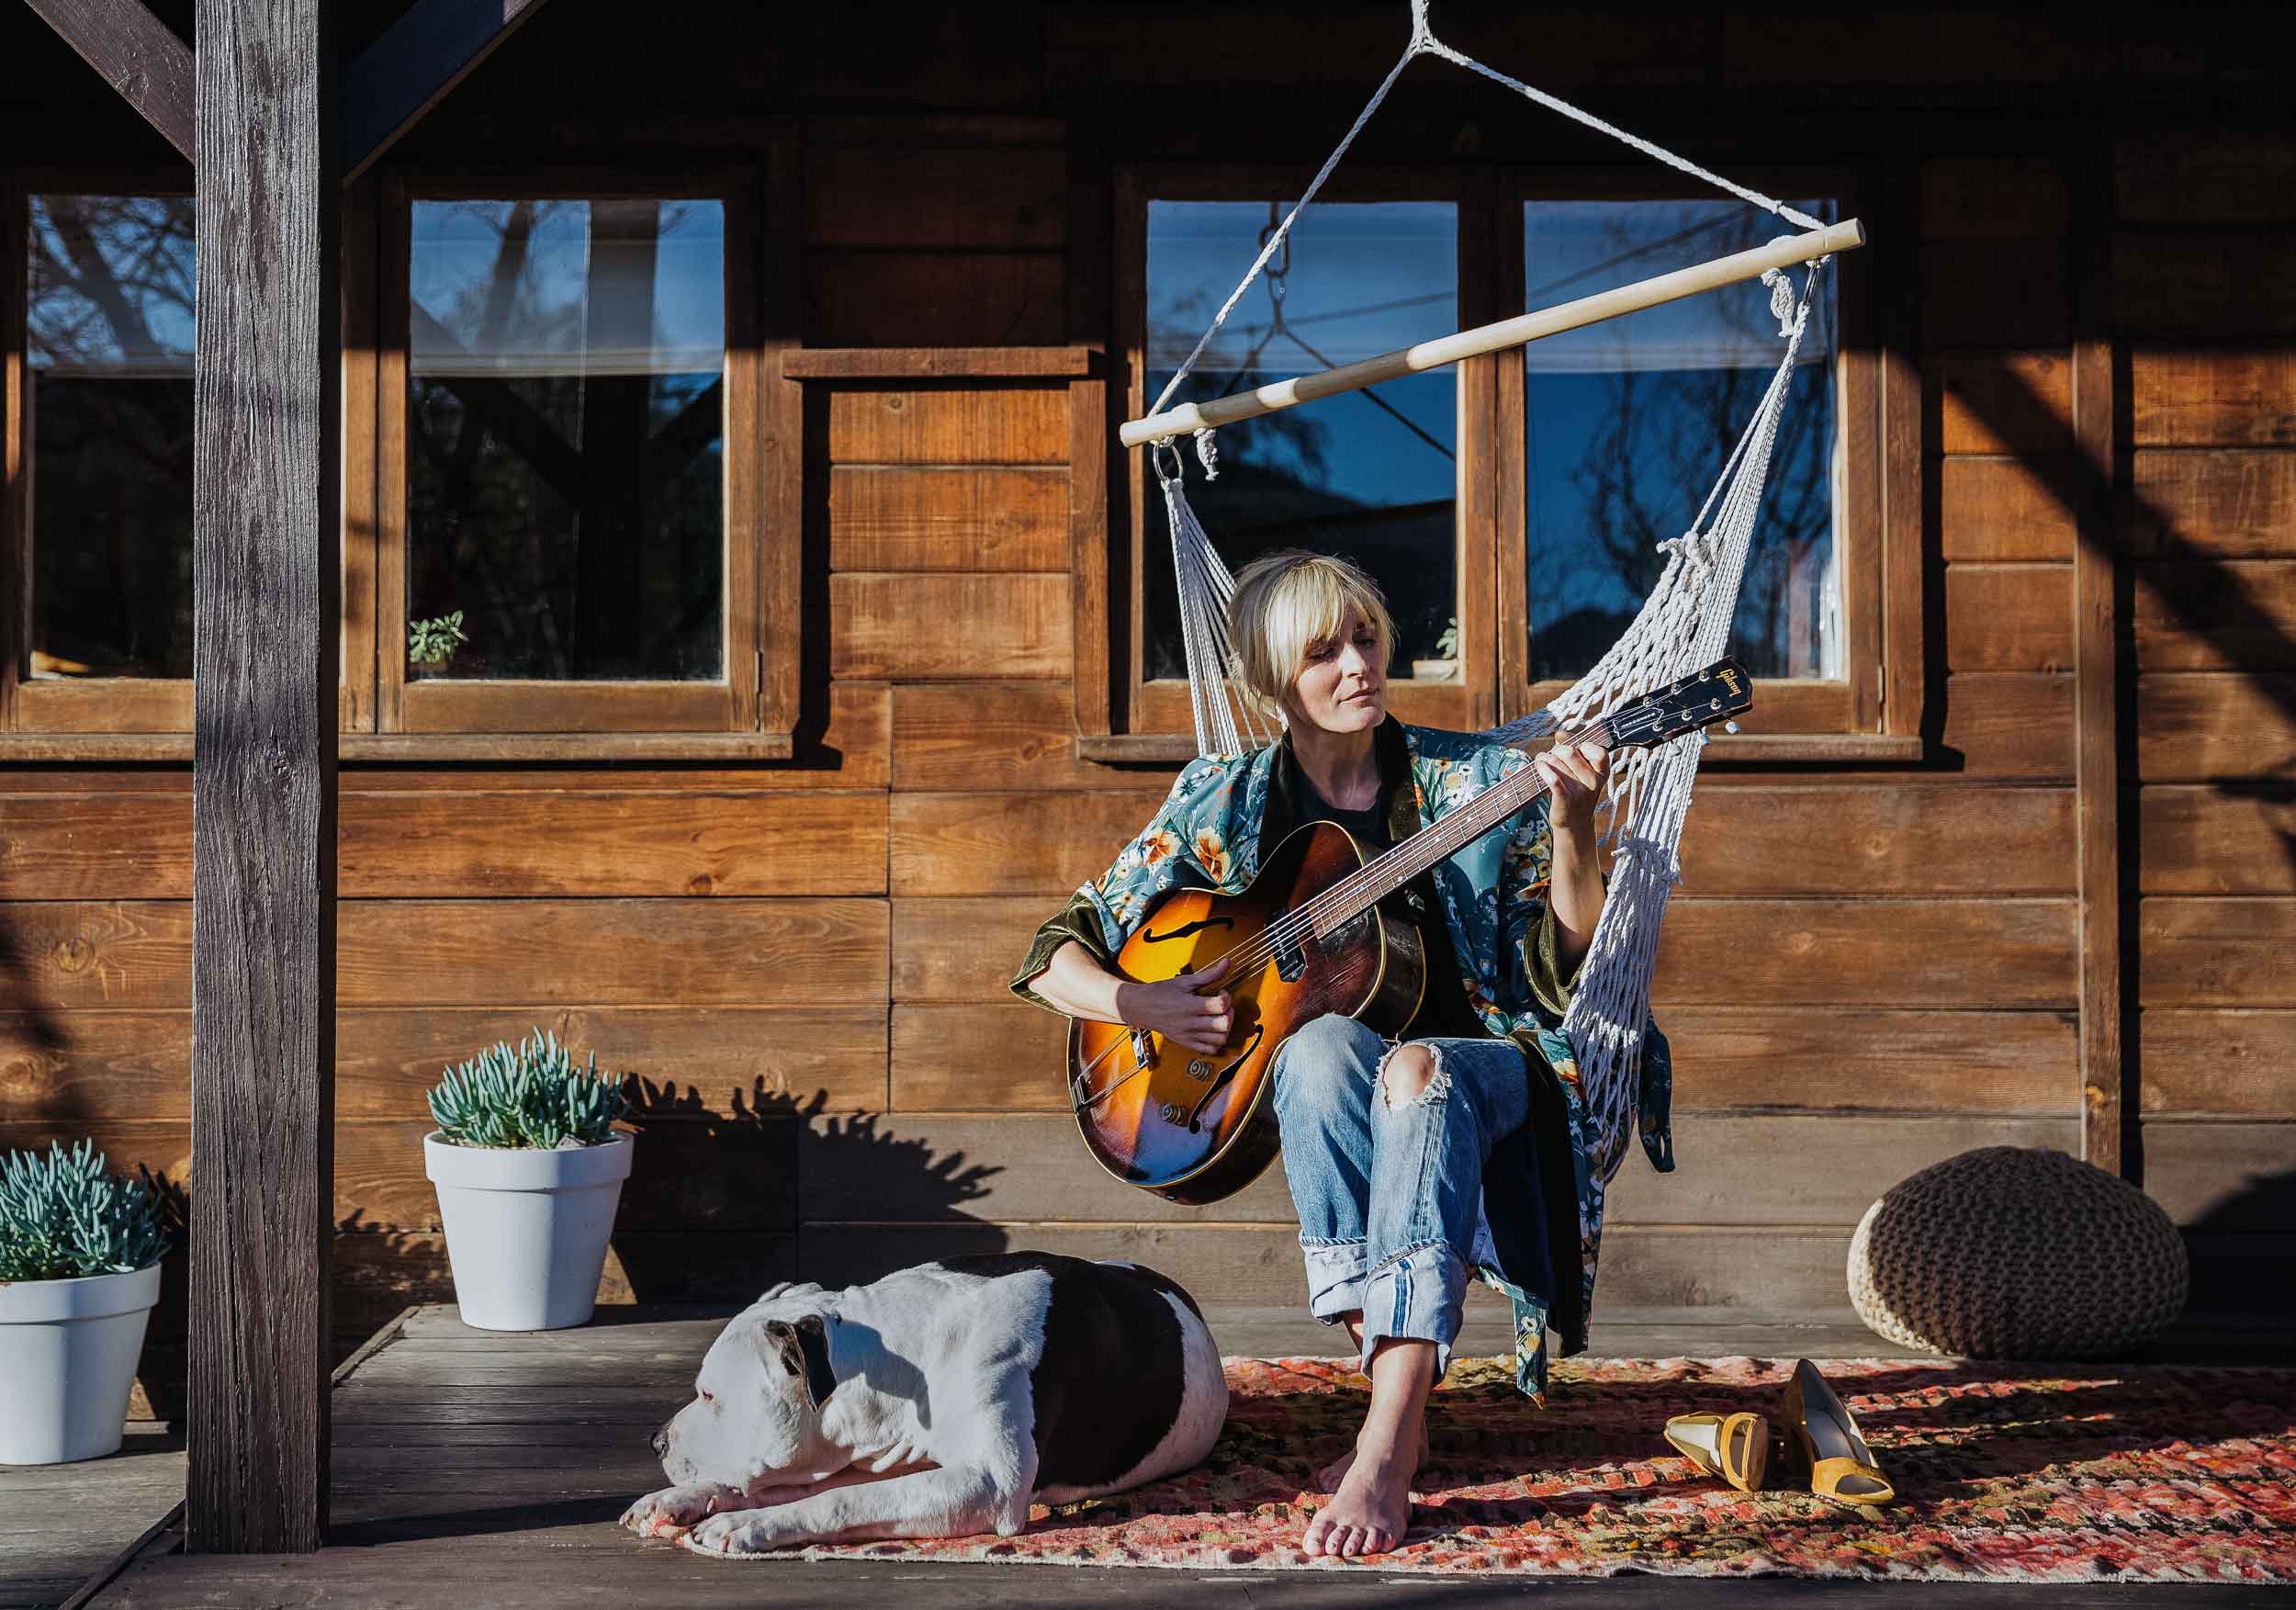 Musician Marnie Herald playing her guitar on her front porch